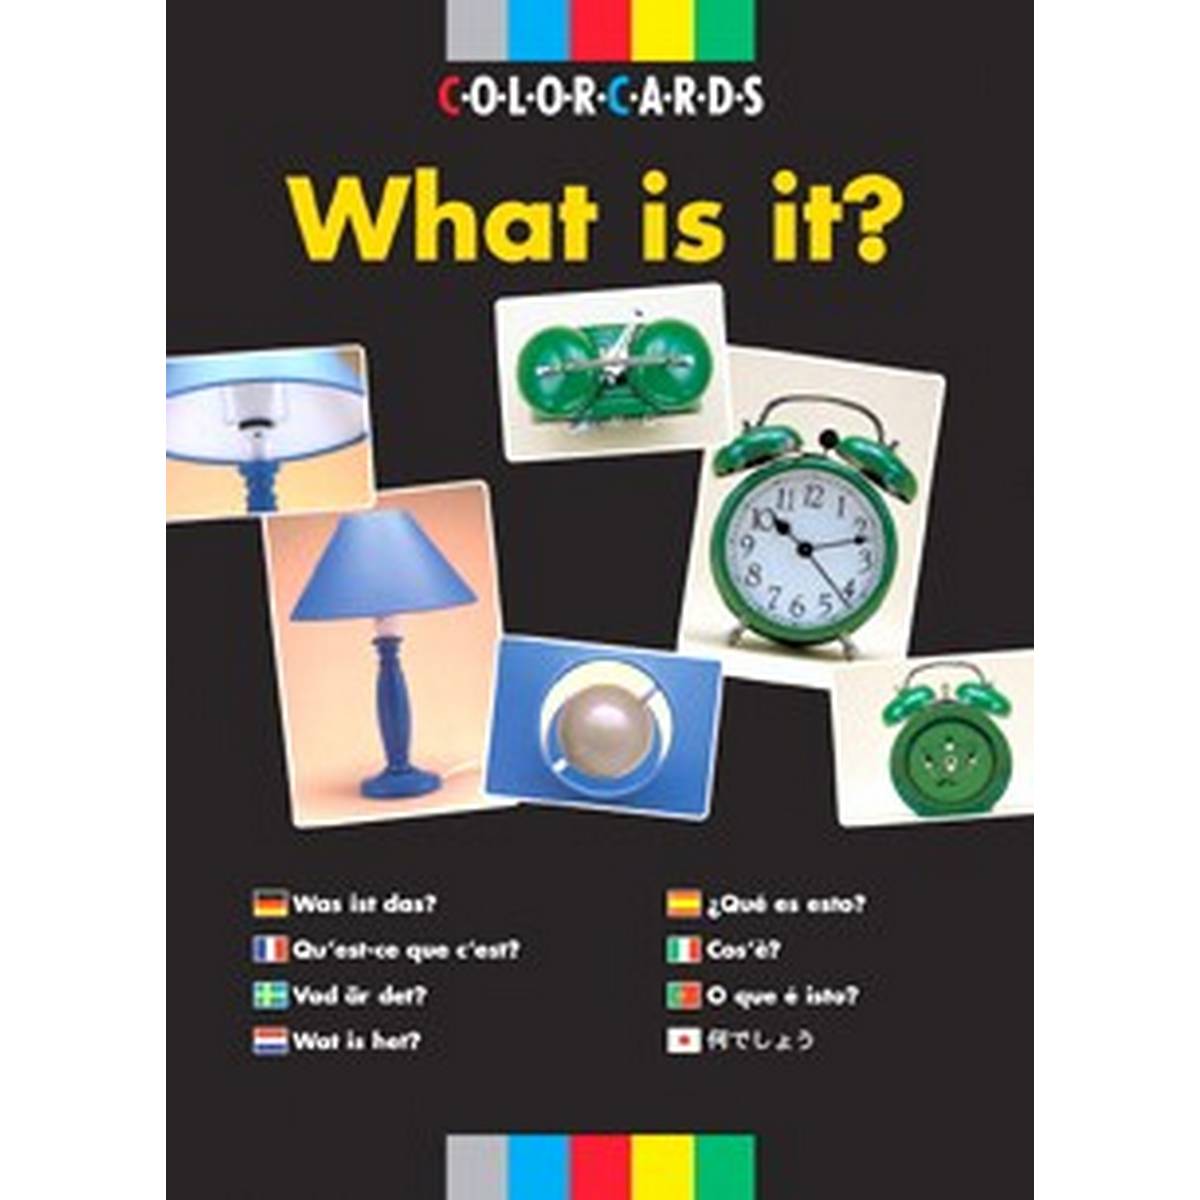 ColorCards: What is it?